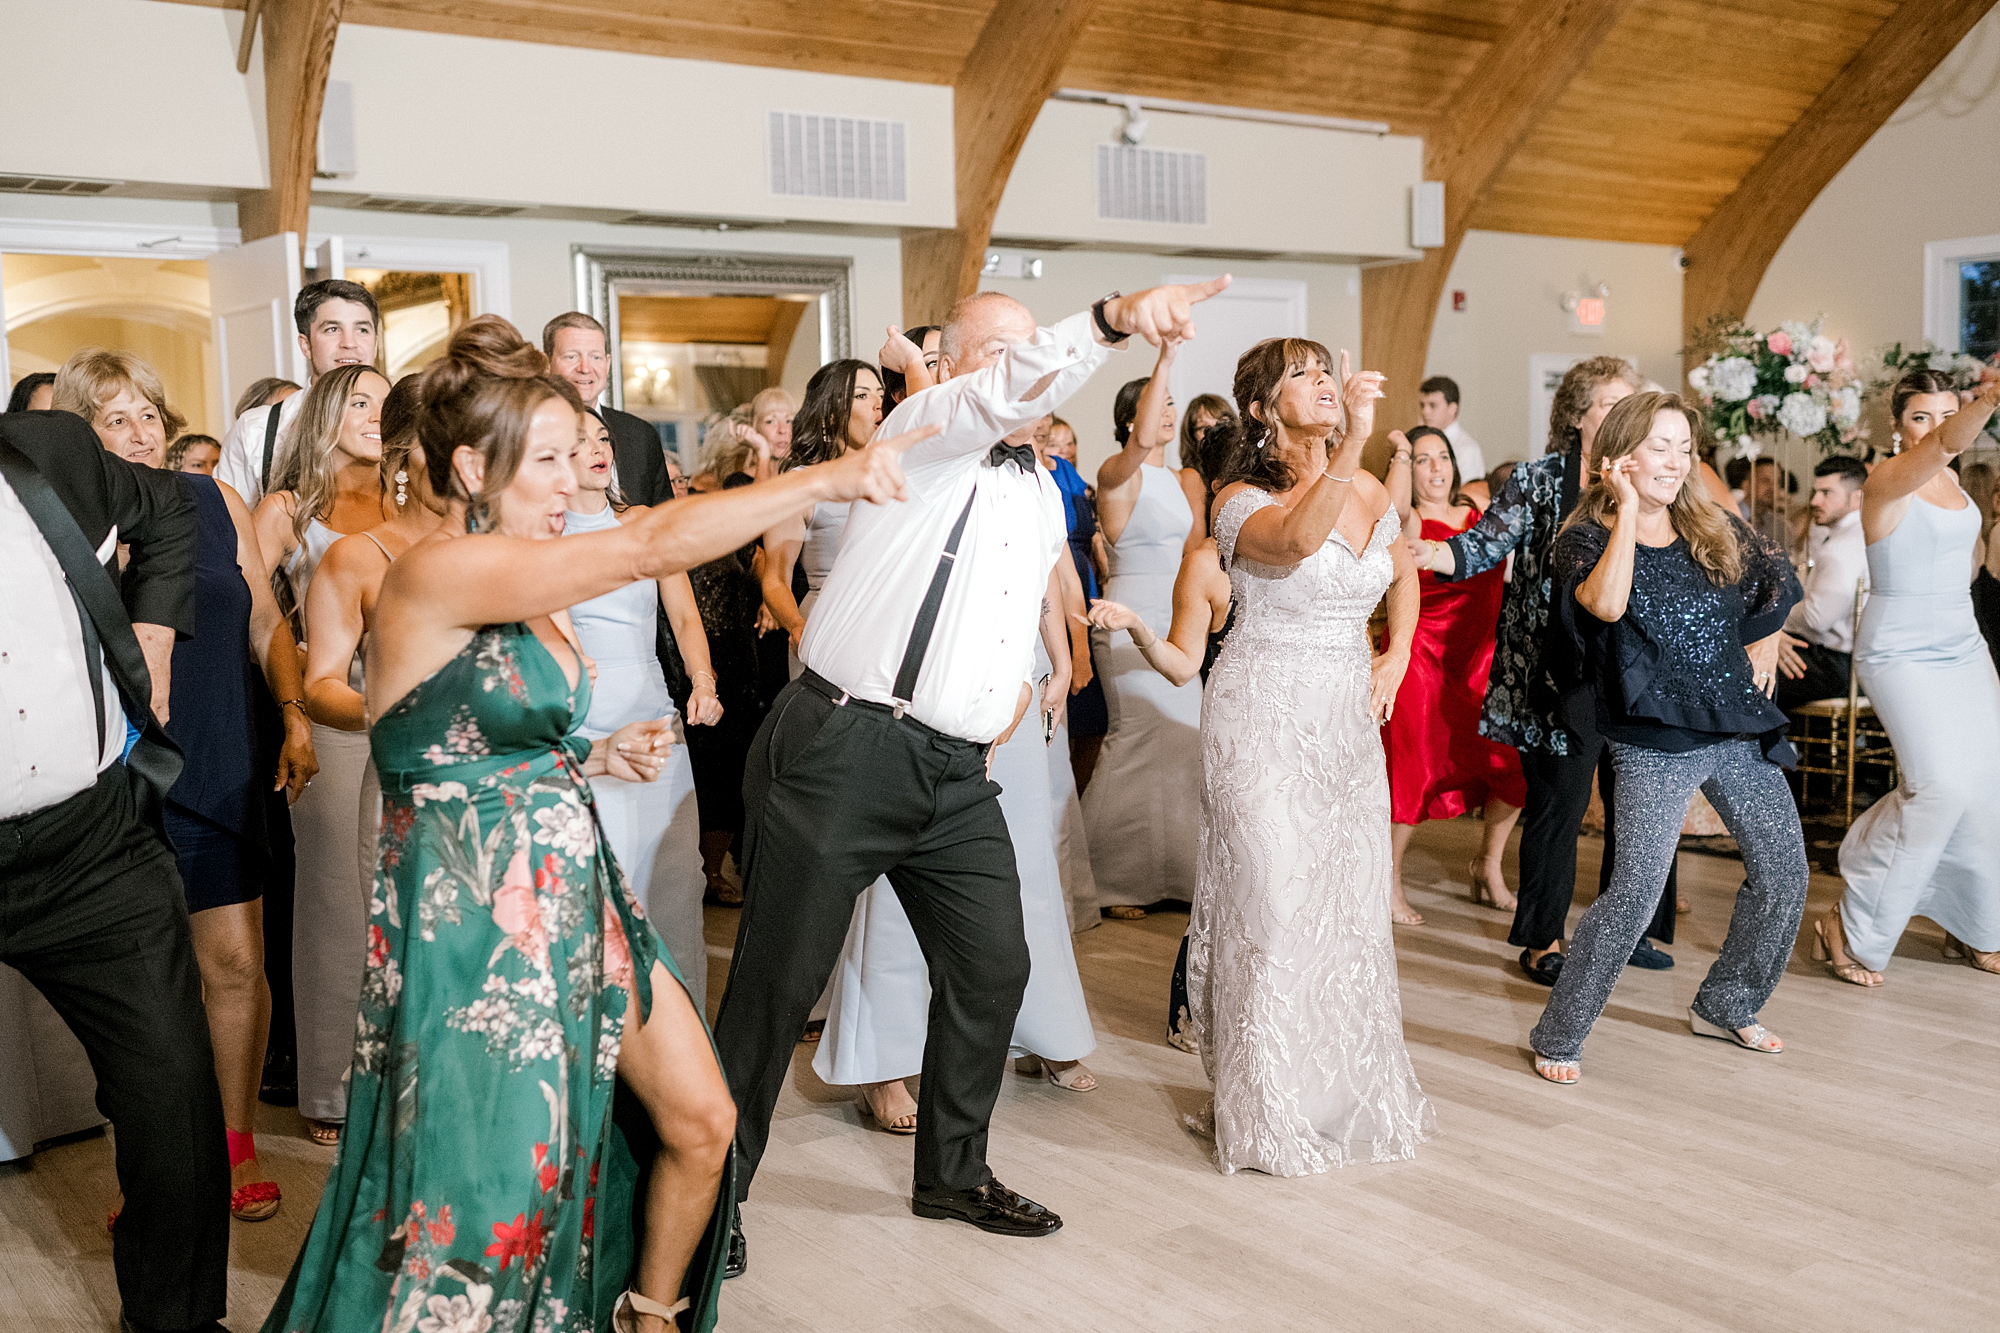 guests participate in flash mob for bride and groom at Bonnet Island Estate wedding reception